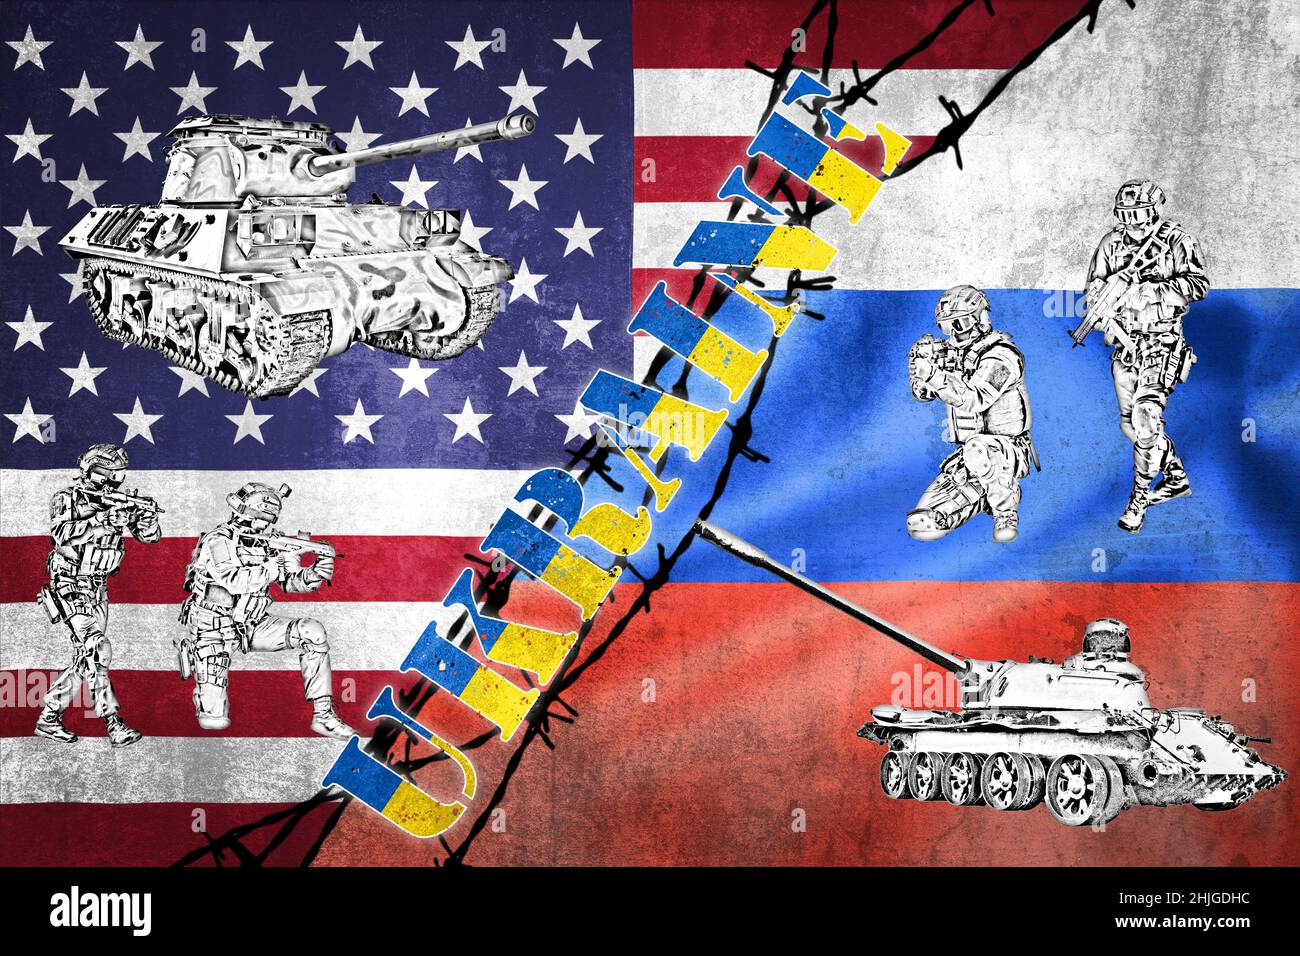 War games between Russia and USA over Ukraine on grunge flags illustration, pointing at each other, concept of tense relations between west and Russia Stock Photo